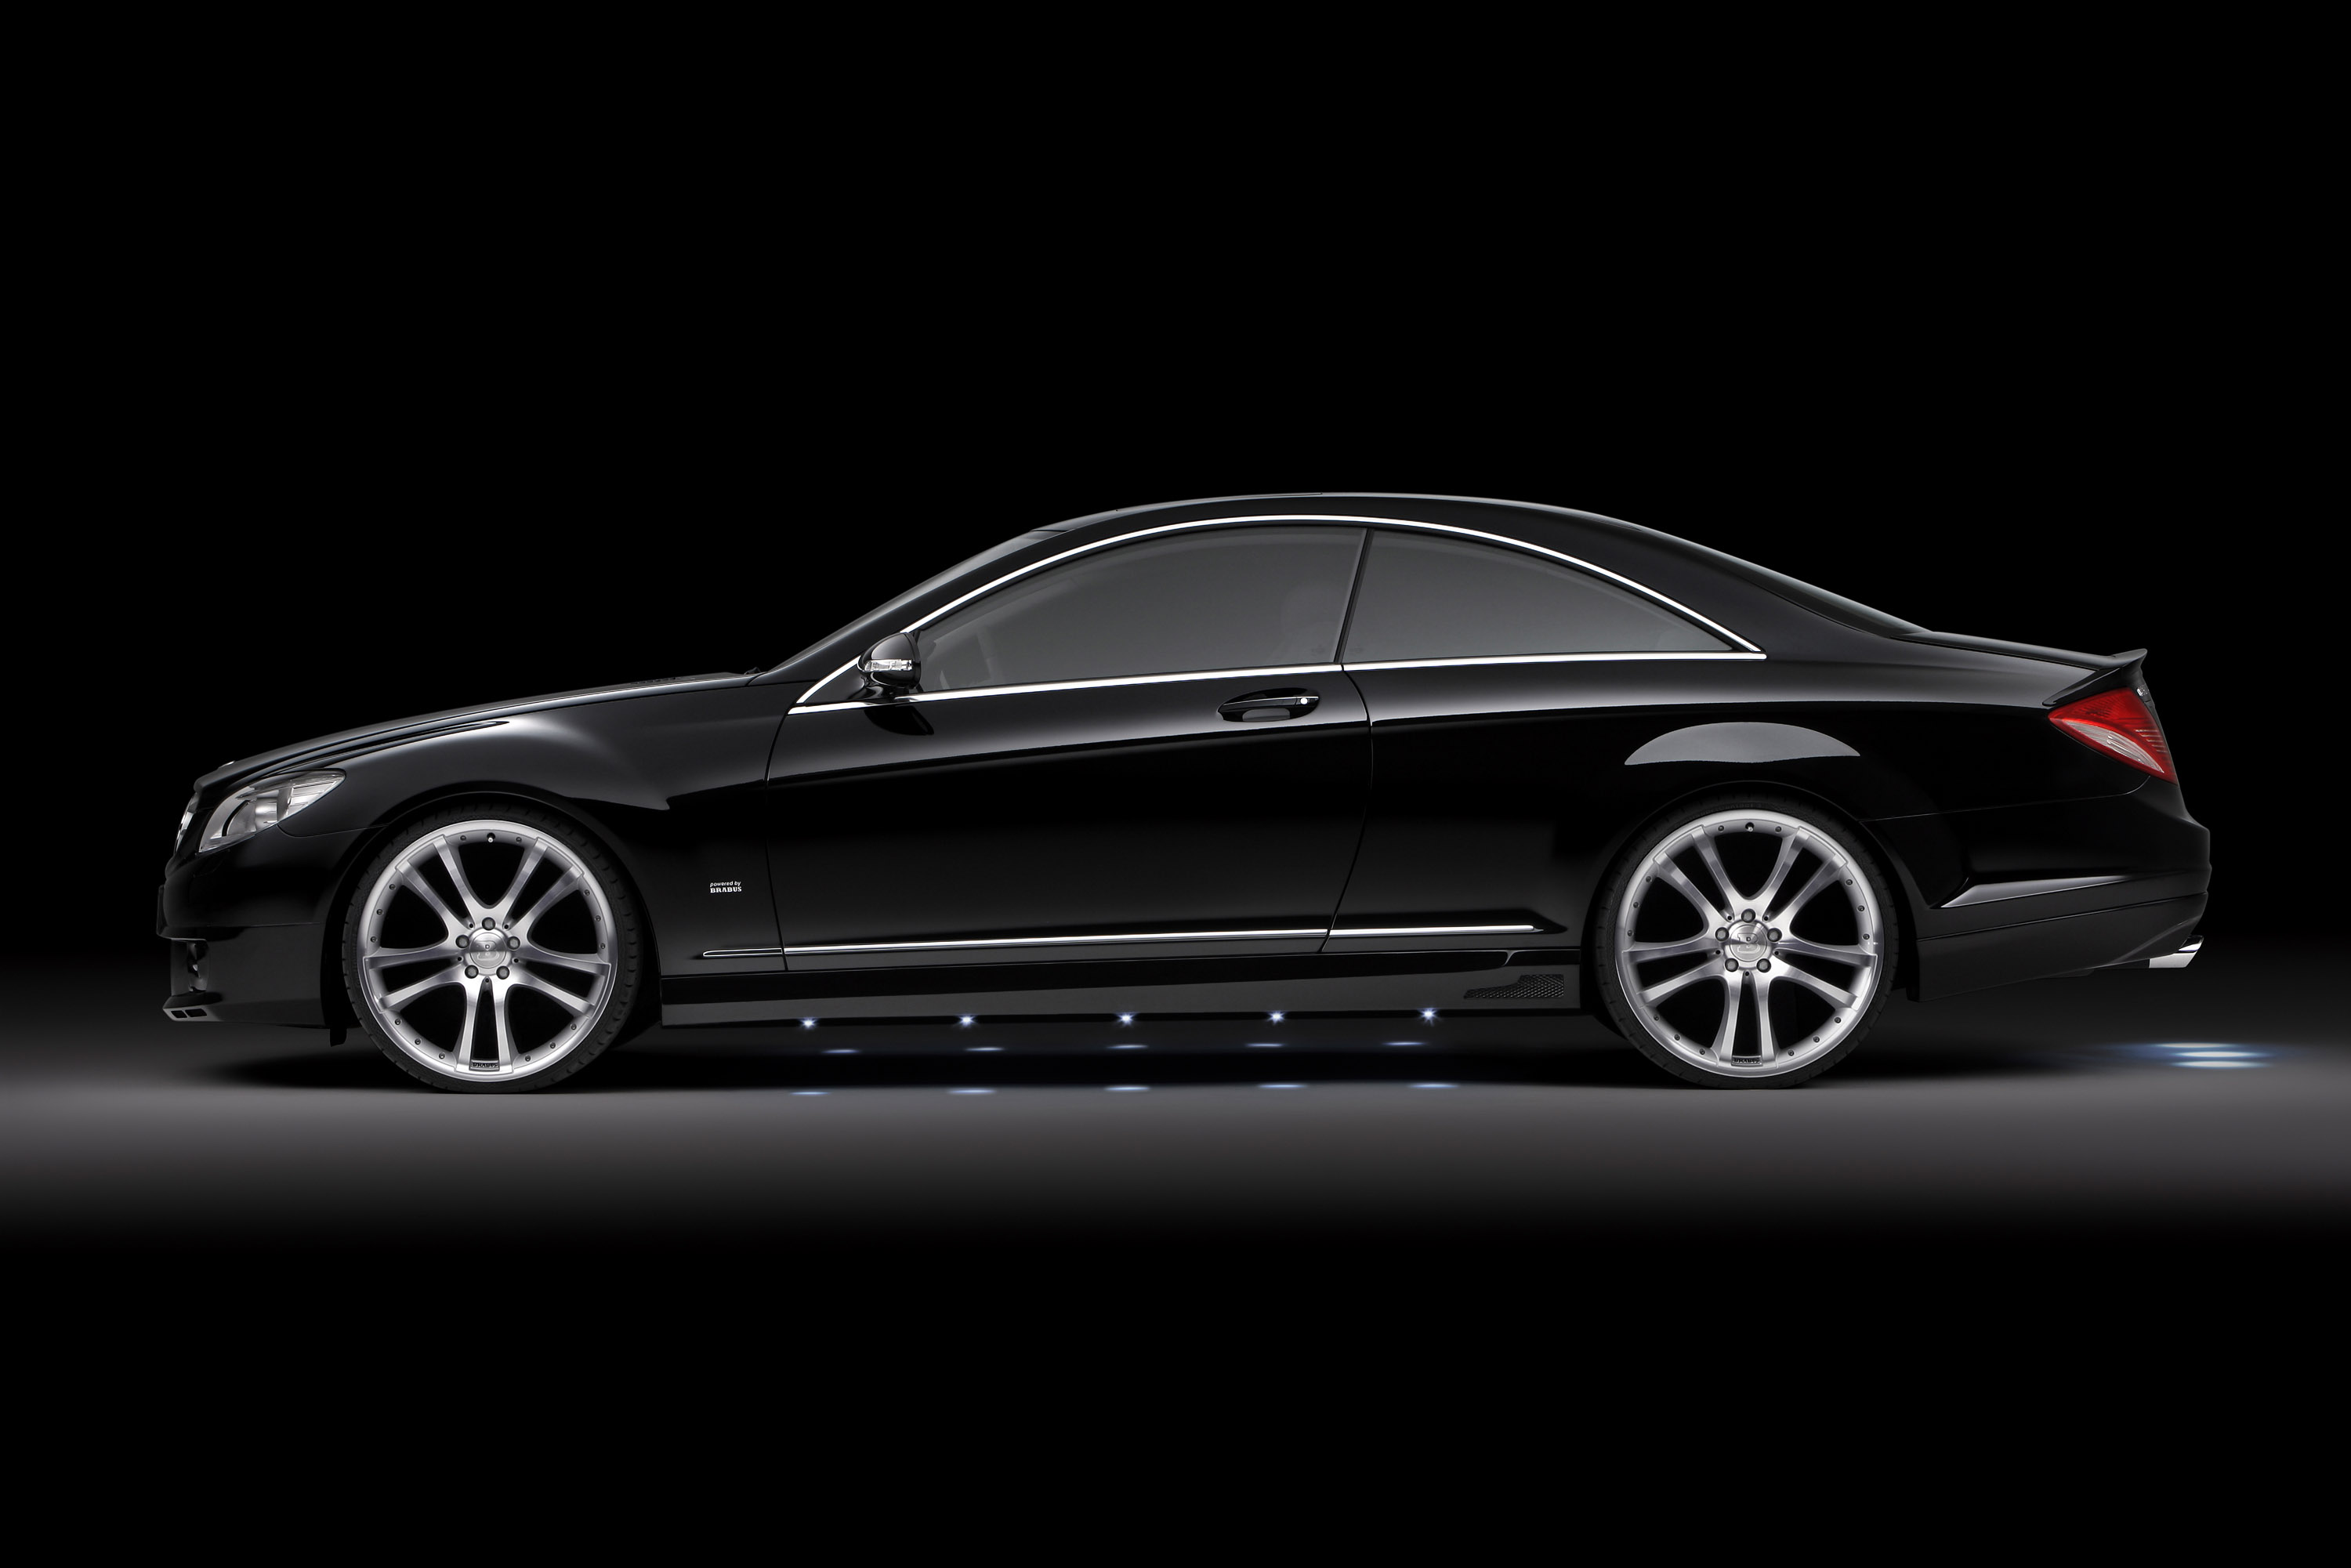 BRABUS Wheels & Fenders for S-Class and CL-Class